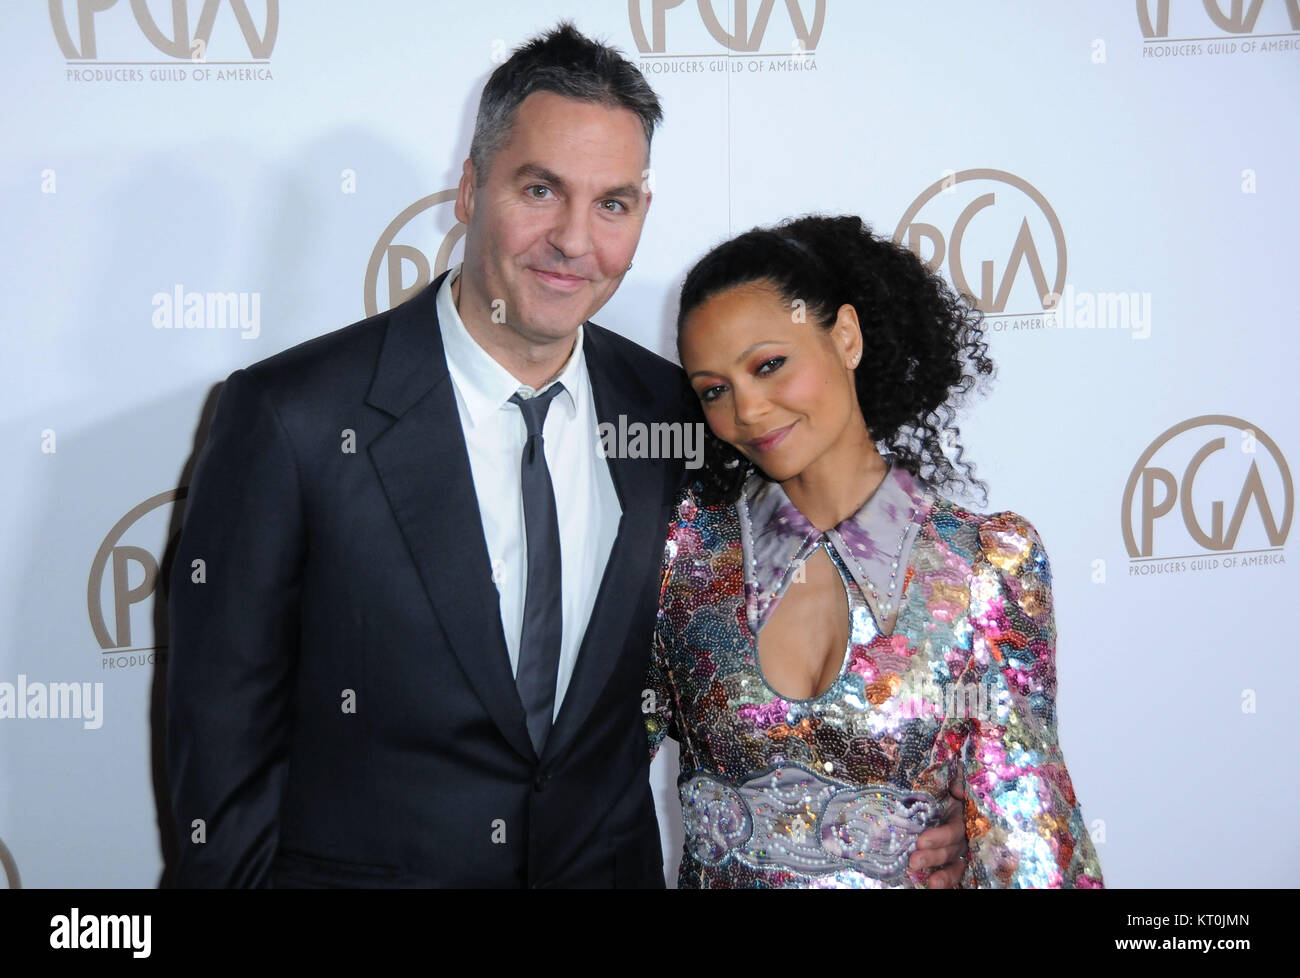 BEVERLY HILLS, CA - JANUARY 28: (L-R) Writer Ol Parker and actress Thandie Newton attend the 28th annual Producers Guild Awards at The Beverly Hilton Hotel on January 28, 2017 in Beverly Hills, California.  Photo by Barry King/Alamy Stock Photo Stock Photo